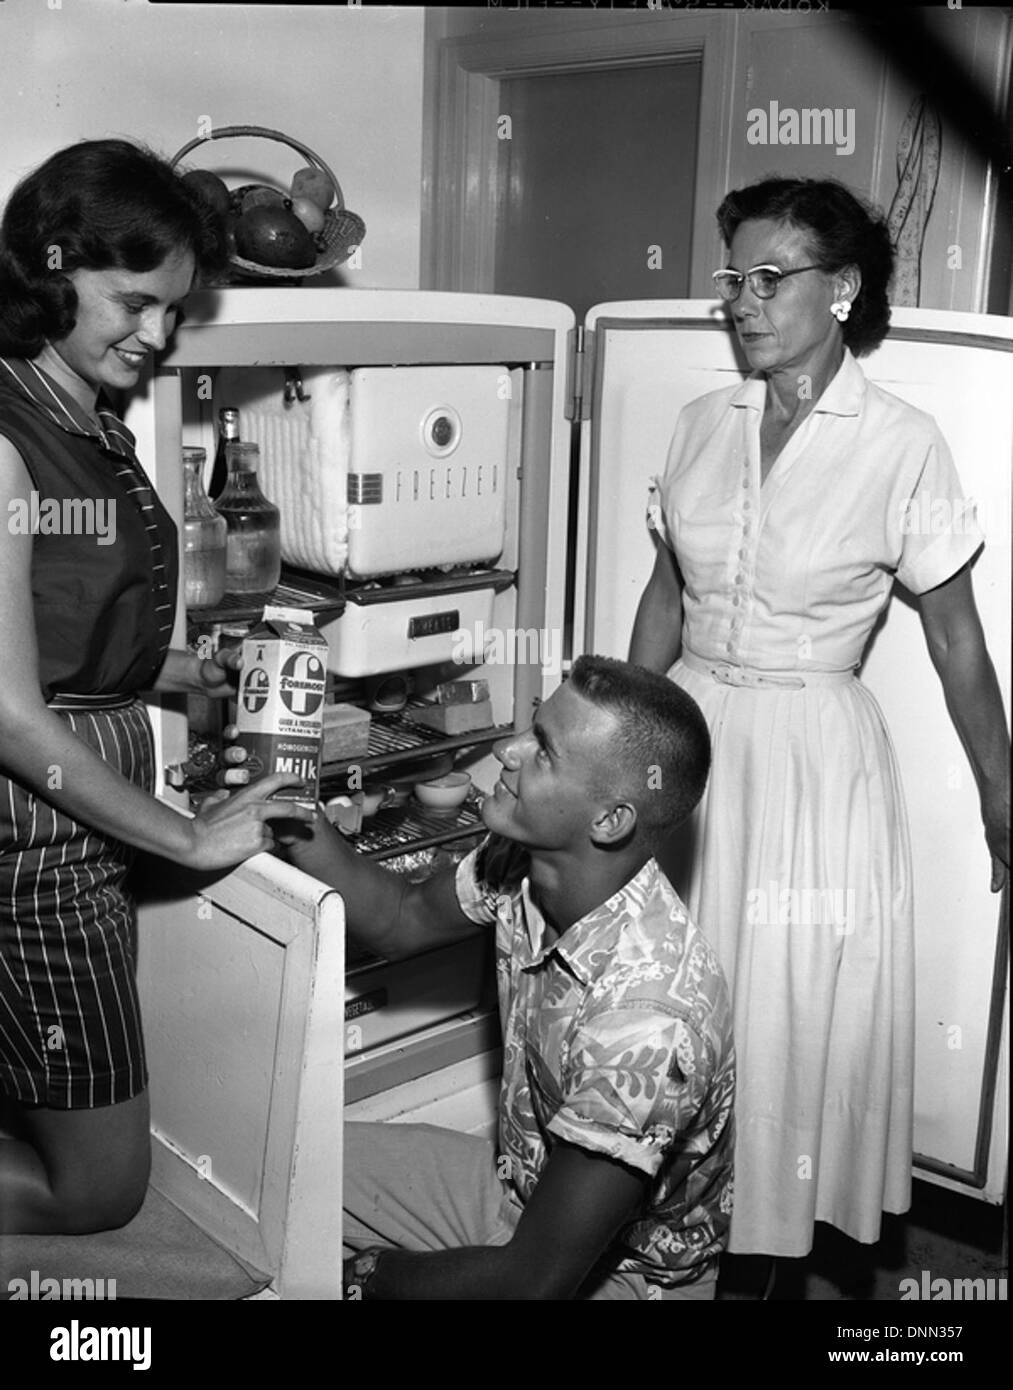 1950s refrigerator Black and White Stock Photos & Images - Alamy